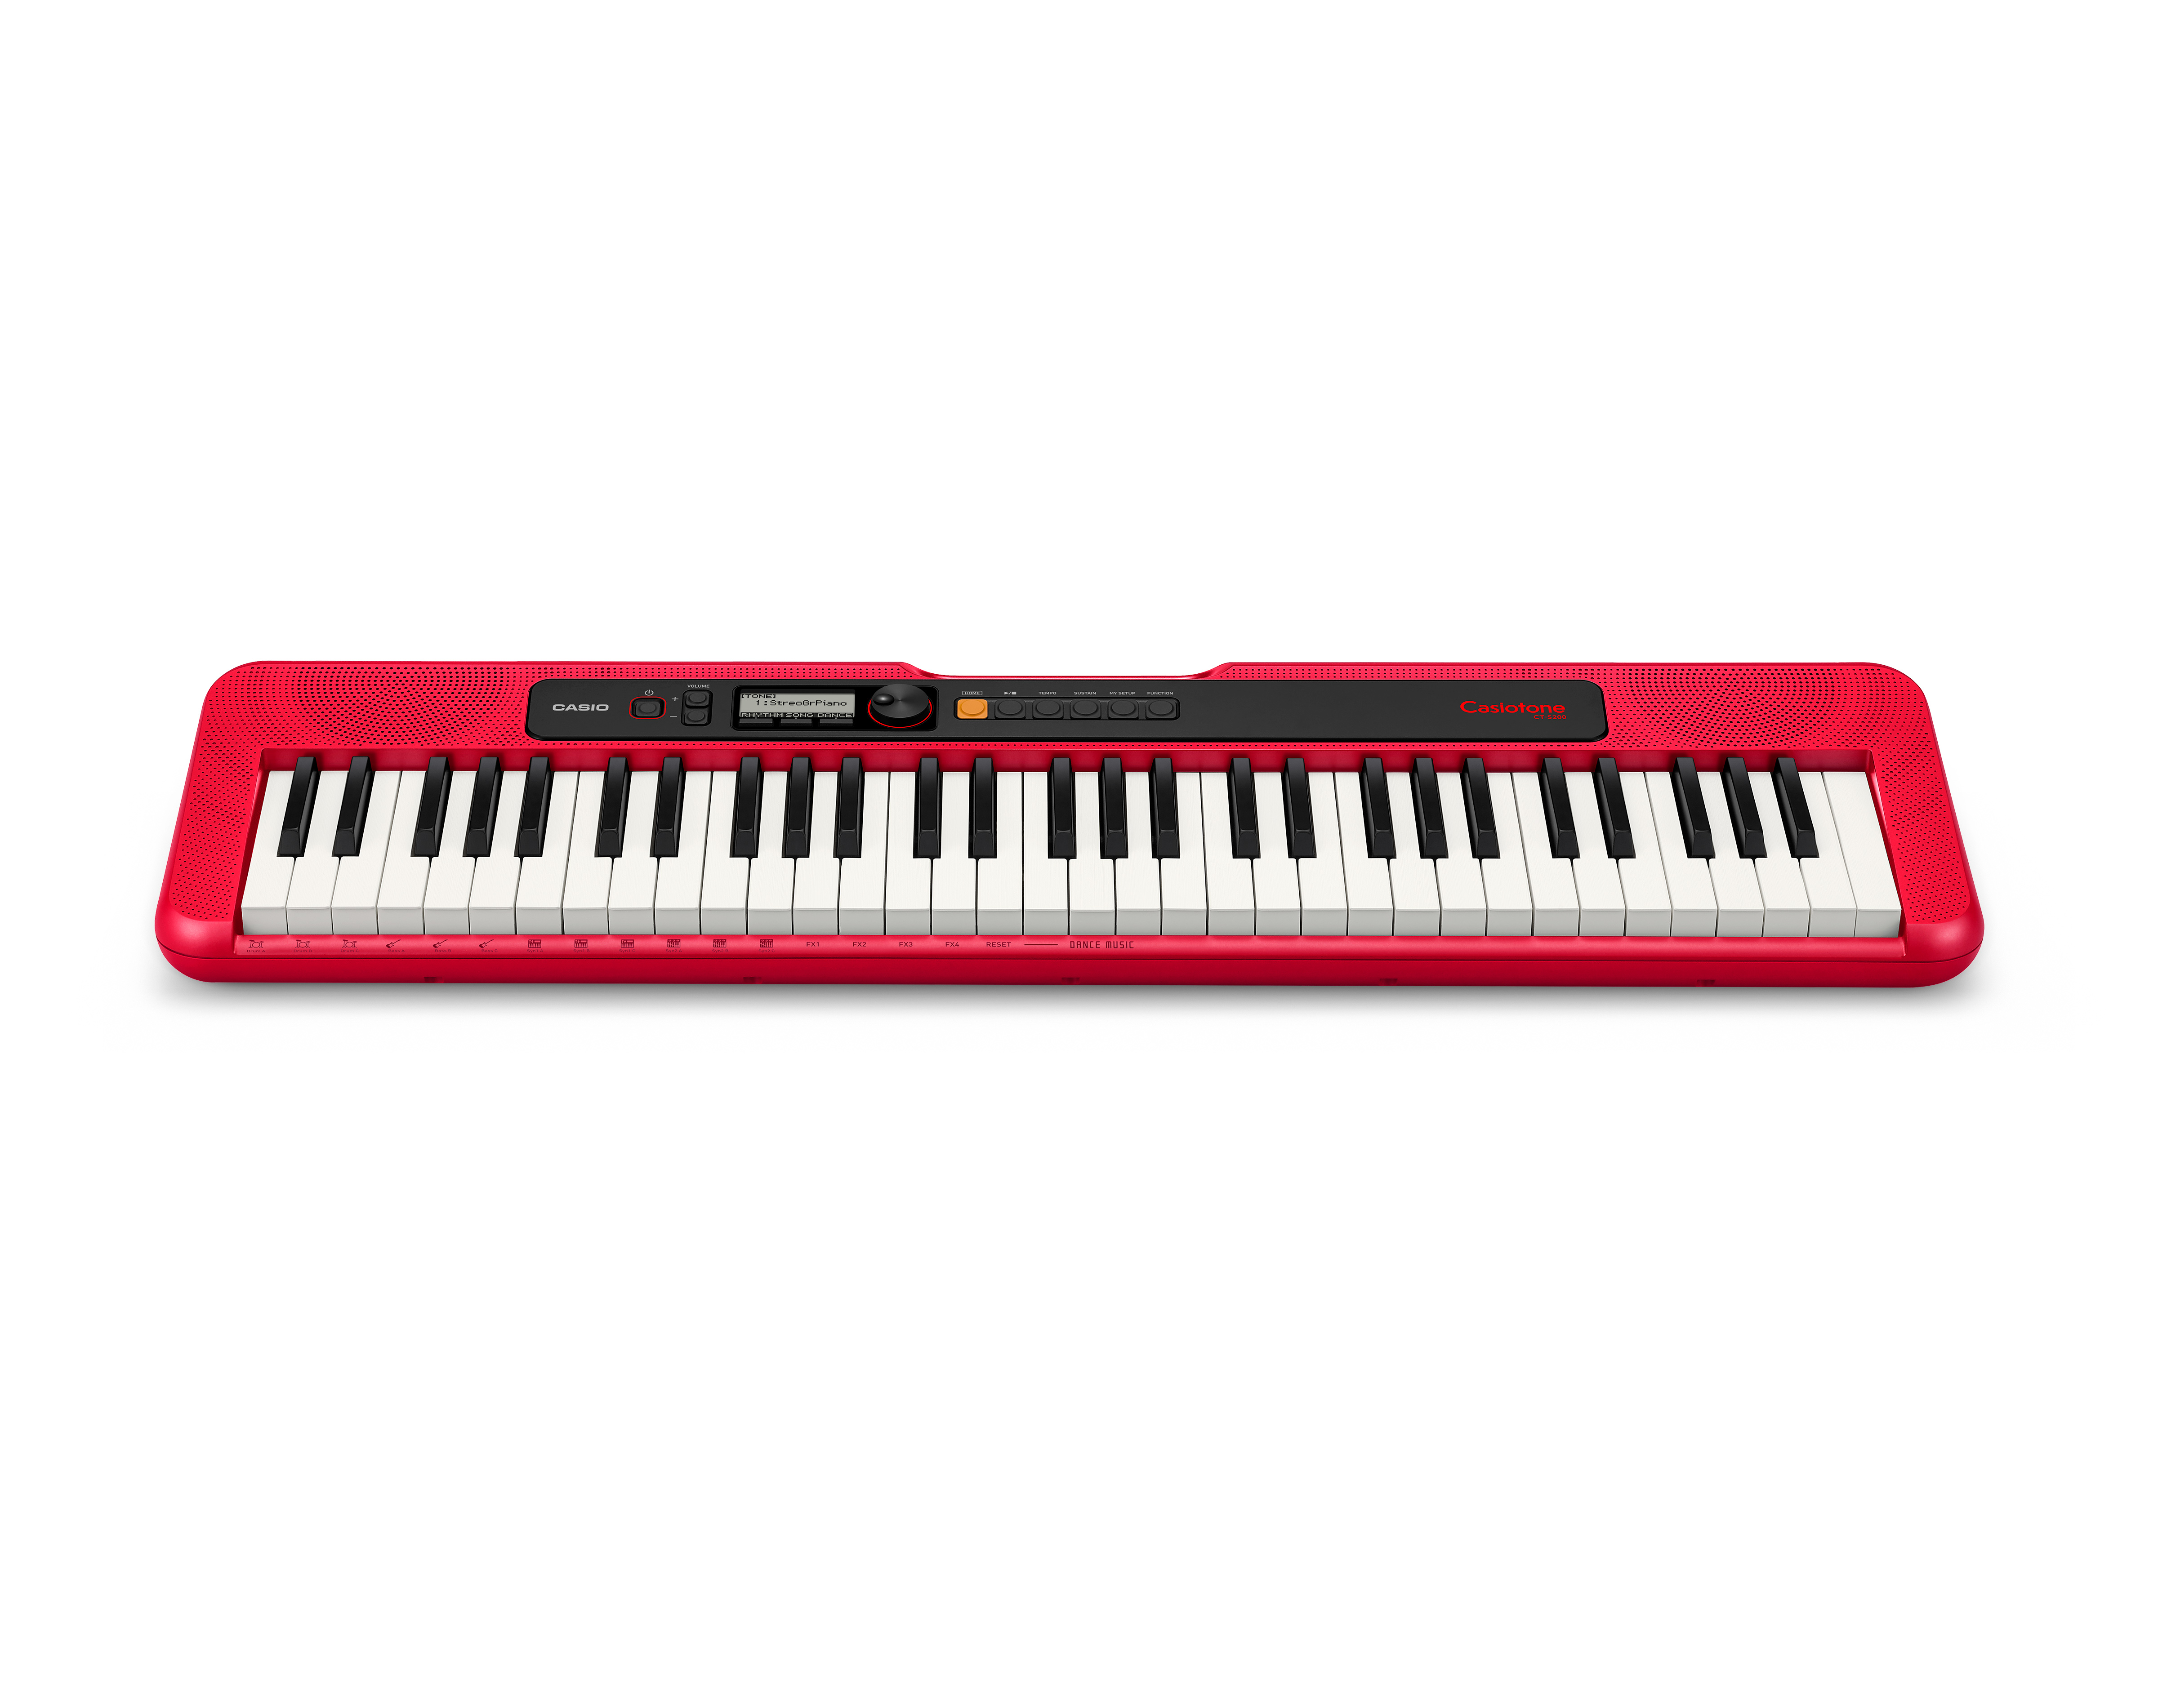 Casio CT-S200 61-Key Portable Keyboard - image 2 of 3